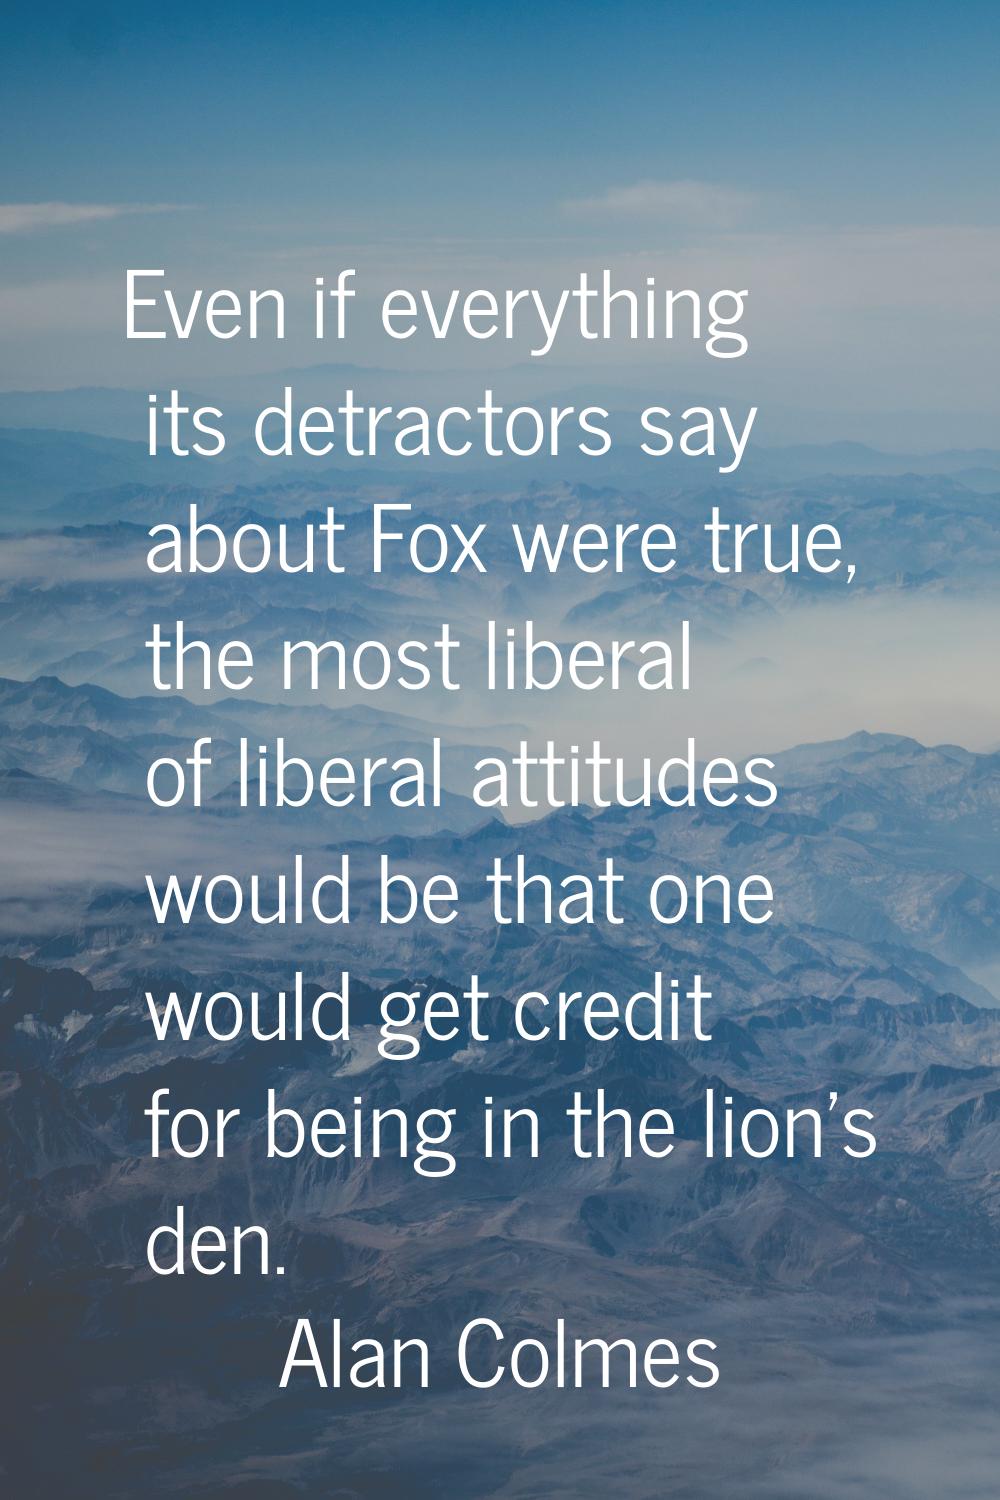 Even if everything its detractors say about Fox were true, the most liberal of liberal attitudes wo